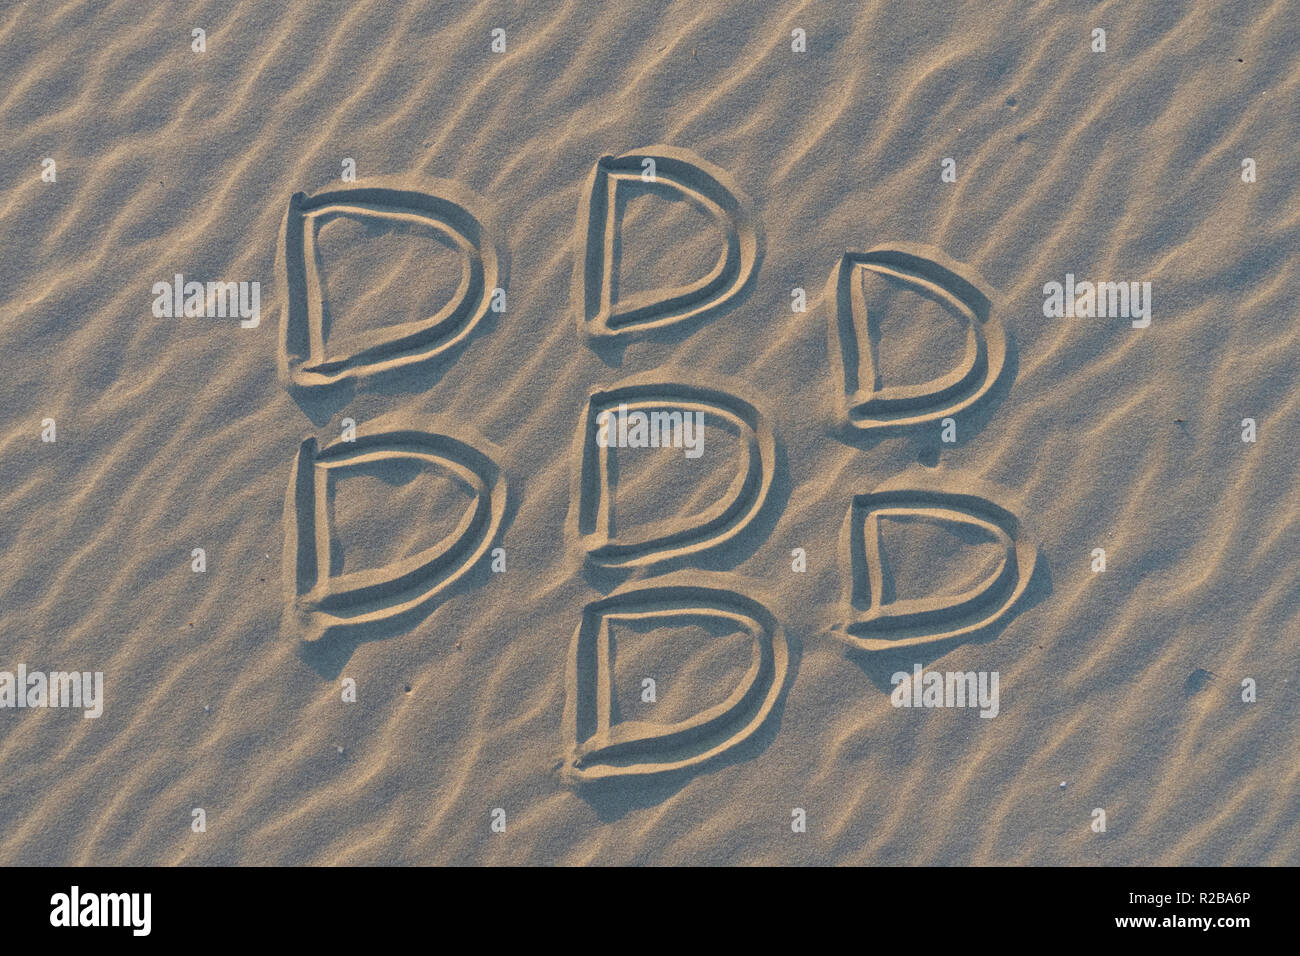 Blackberry logo brand sketched on the sand Stock Photo